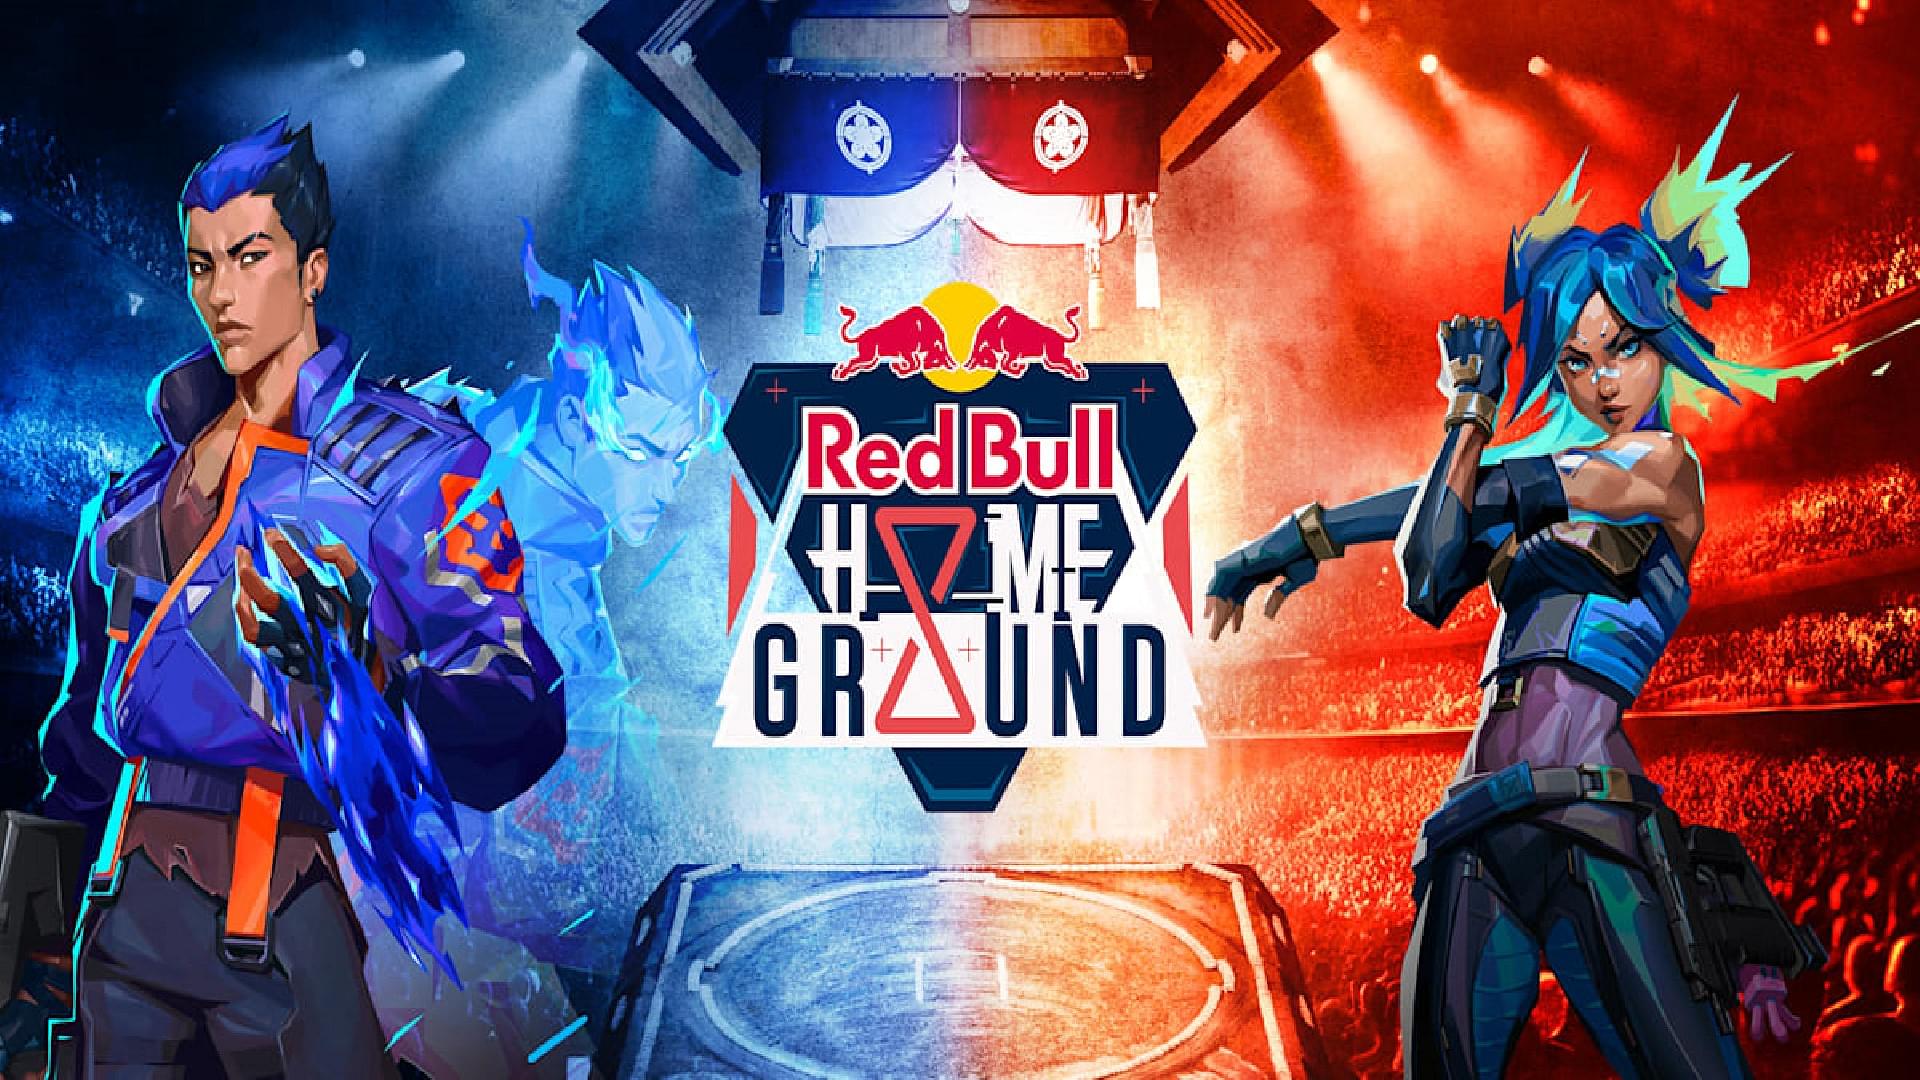 An image of Red Bull Home Ground 4 Poster